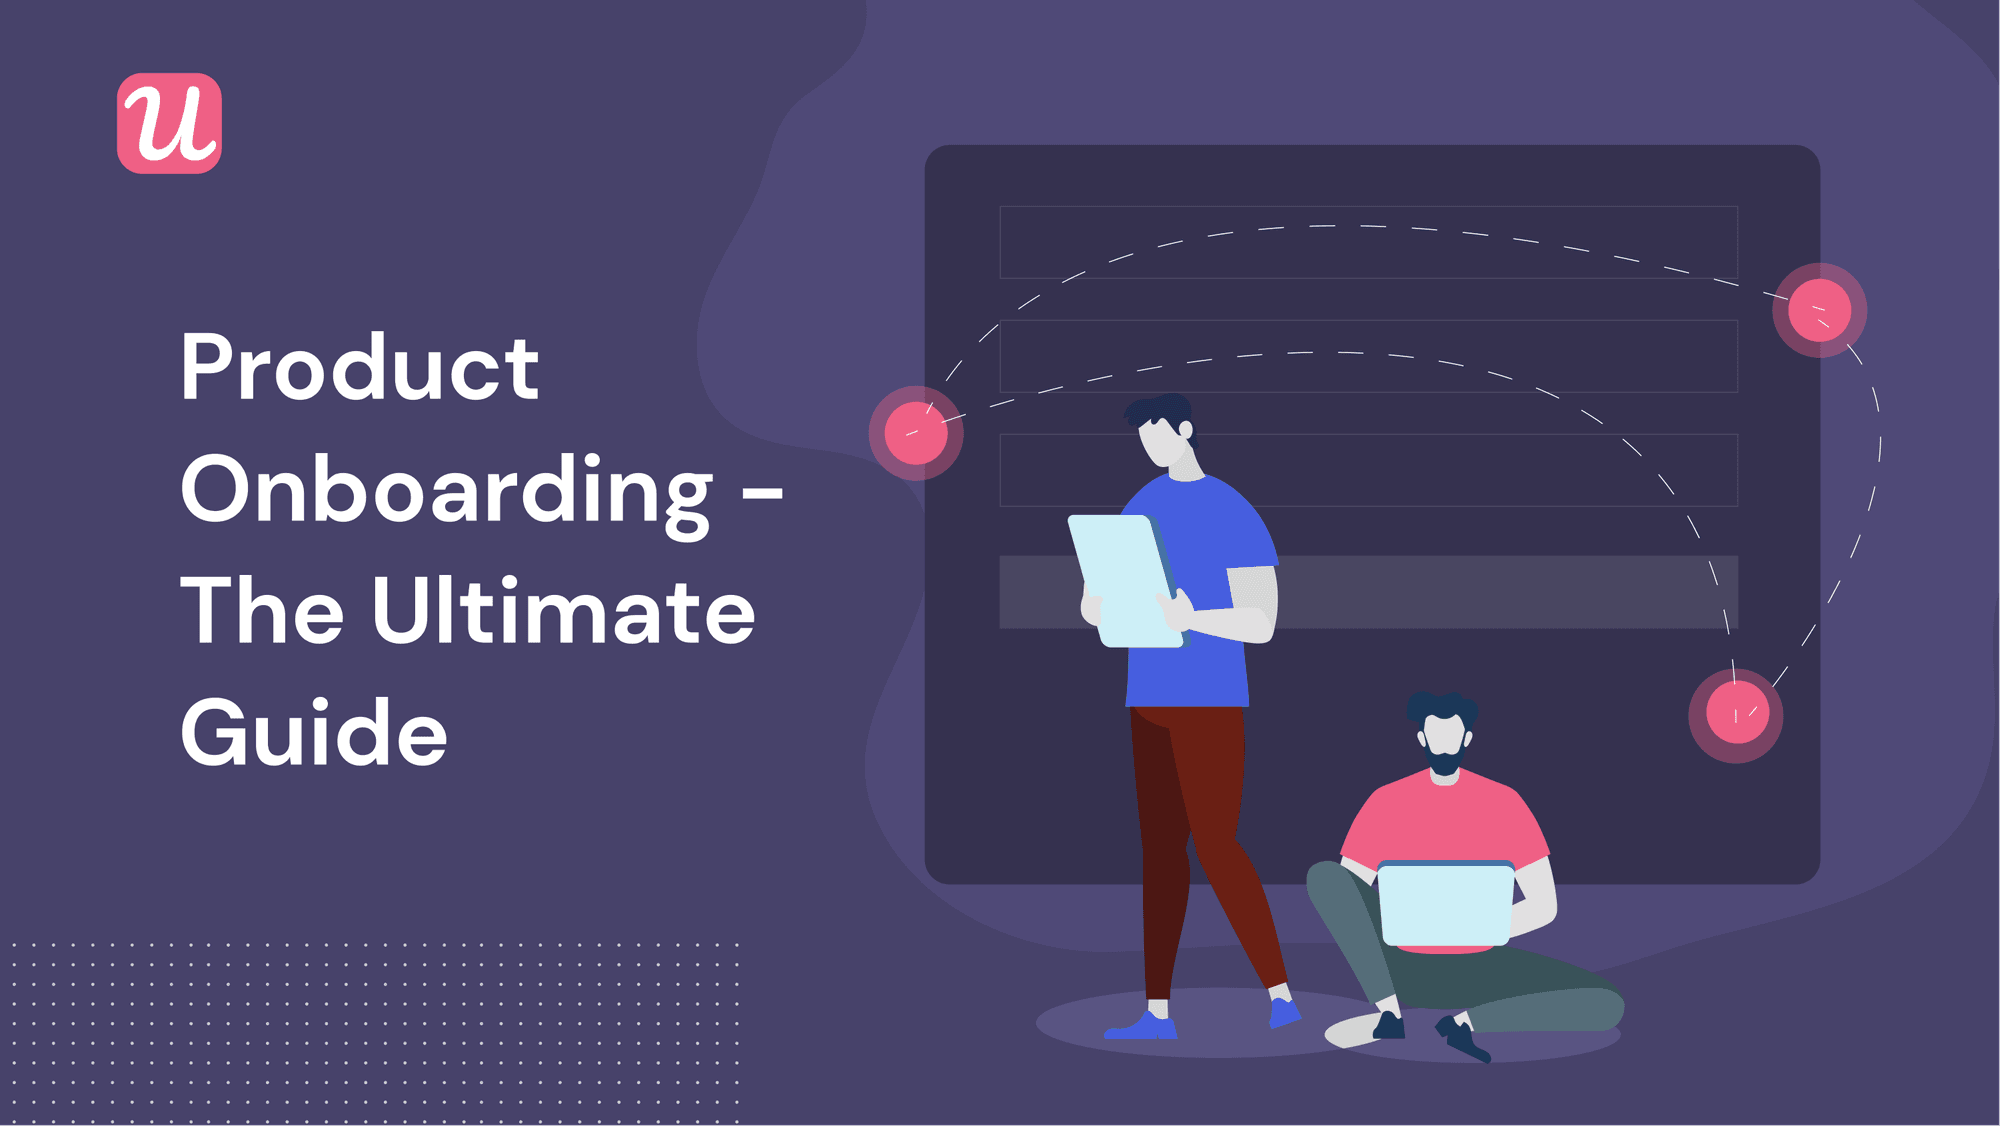 The Ultimate Guide To Product Onboarding For SaaS